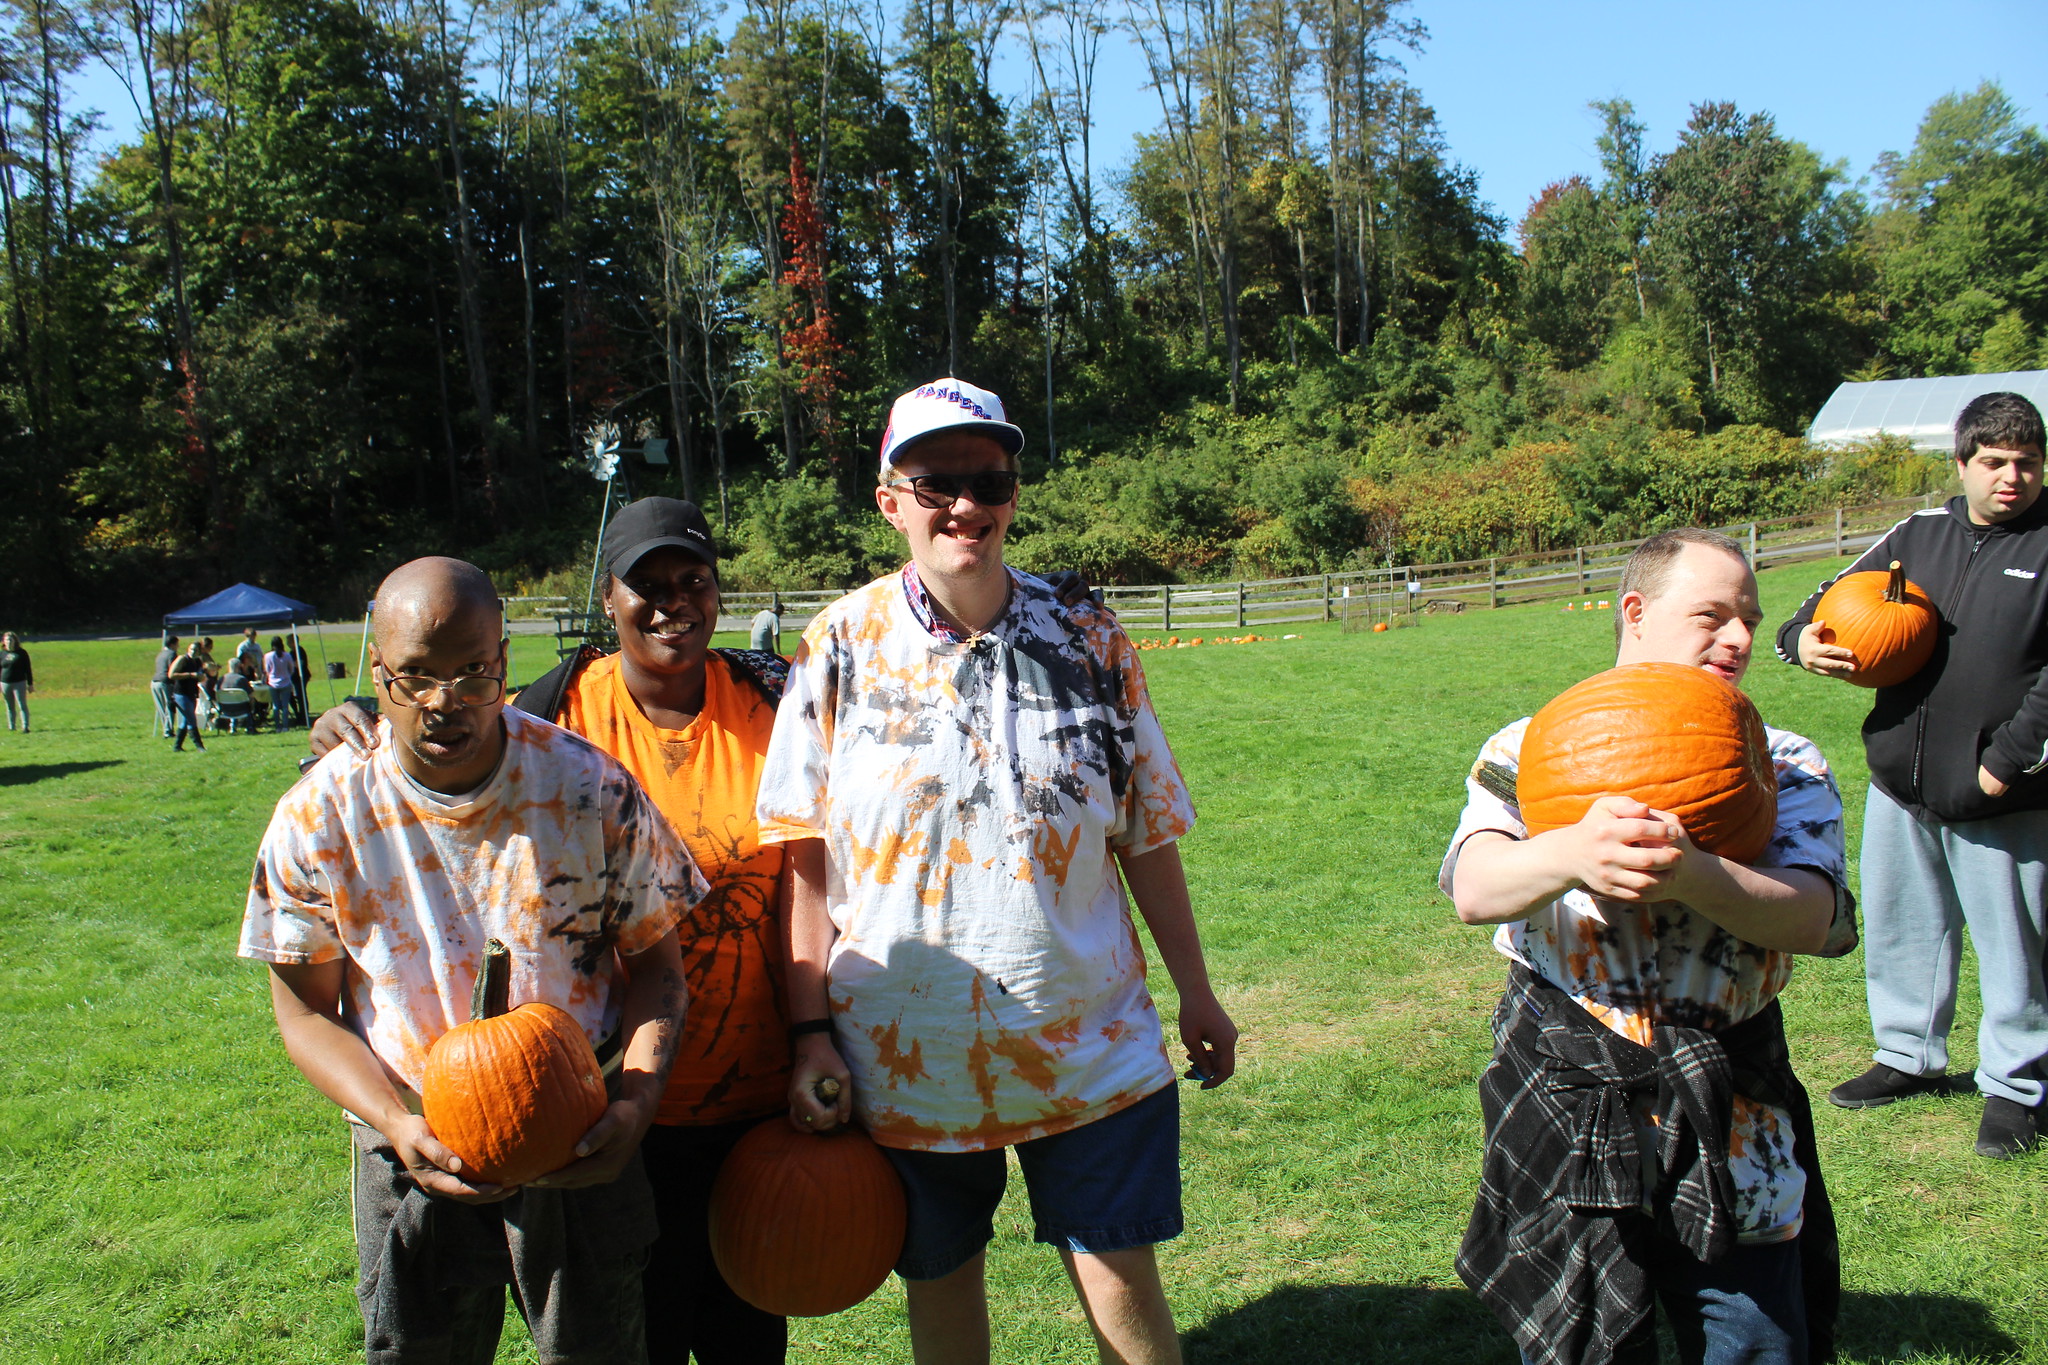 A group of three men in black and orange tie-dyed shirts hold large orange pumpkins. Their direct care person stands with them out on a field during the Cultivating Dreams Fall Festival at the Farm.